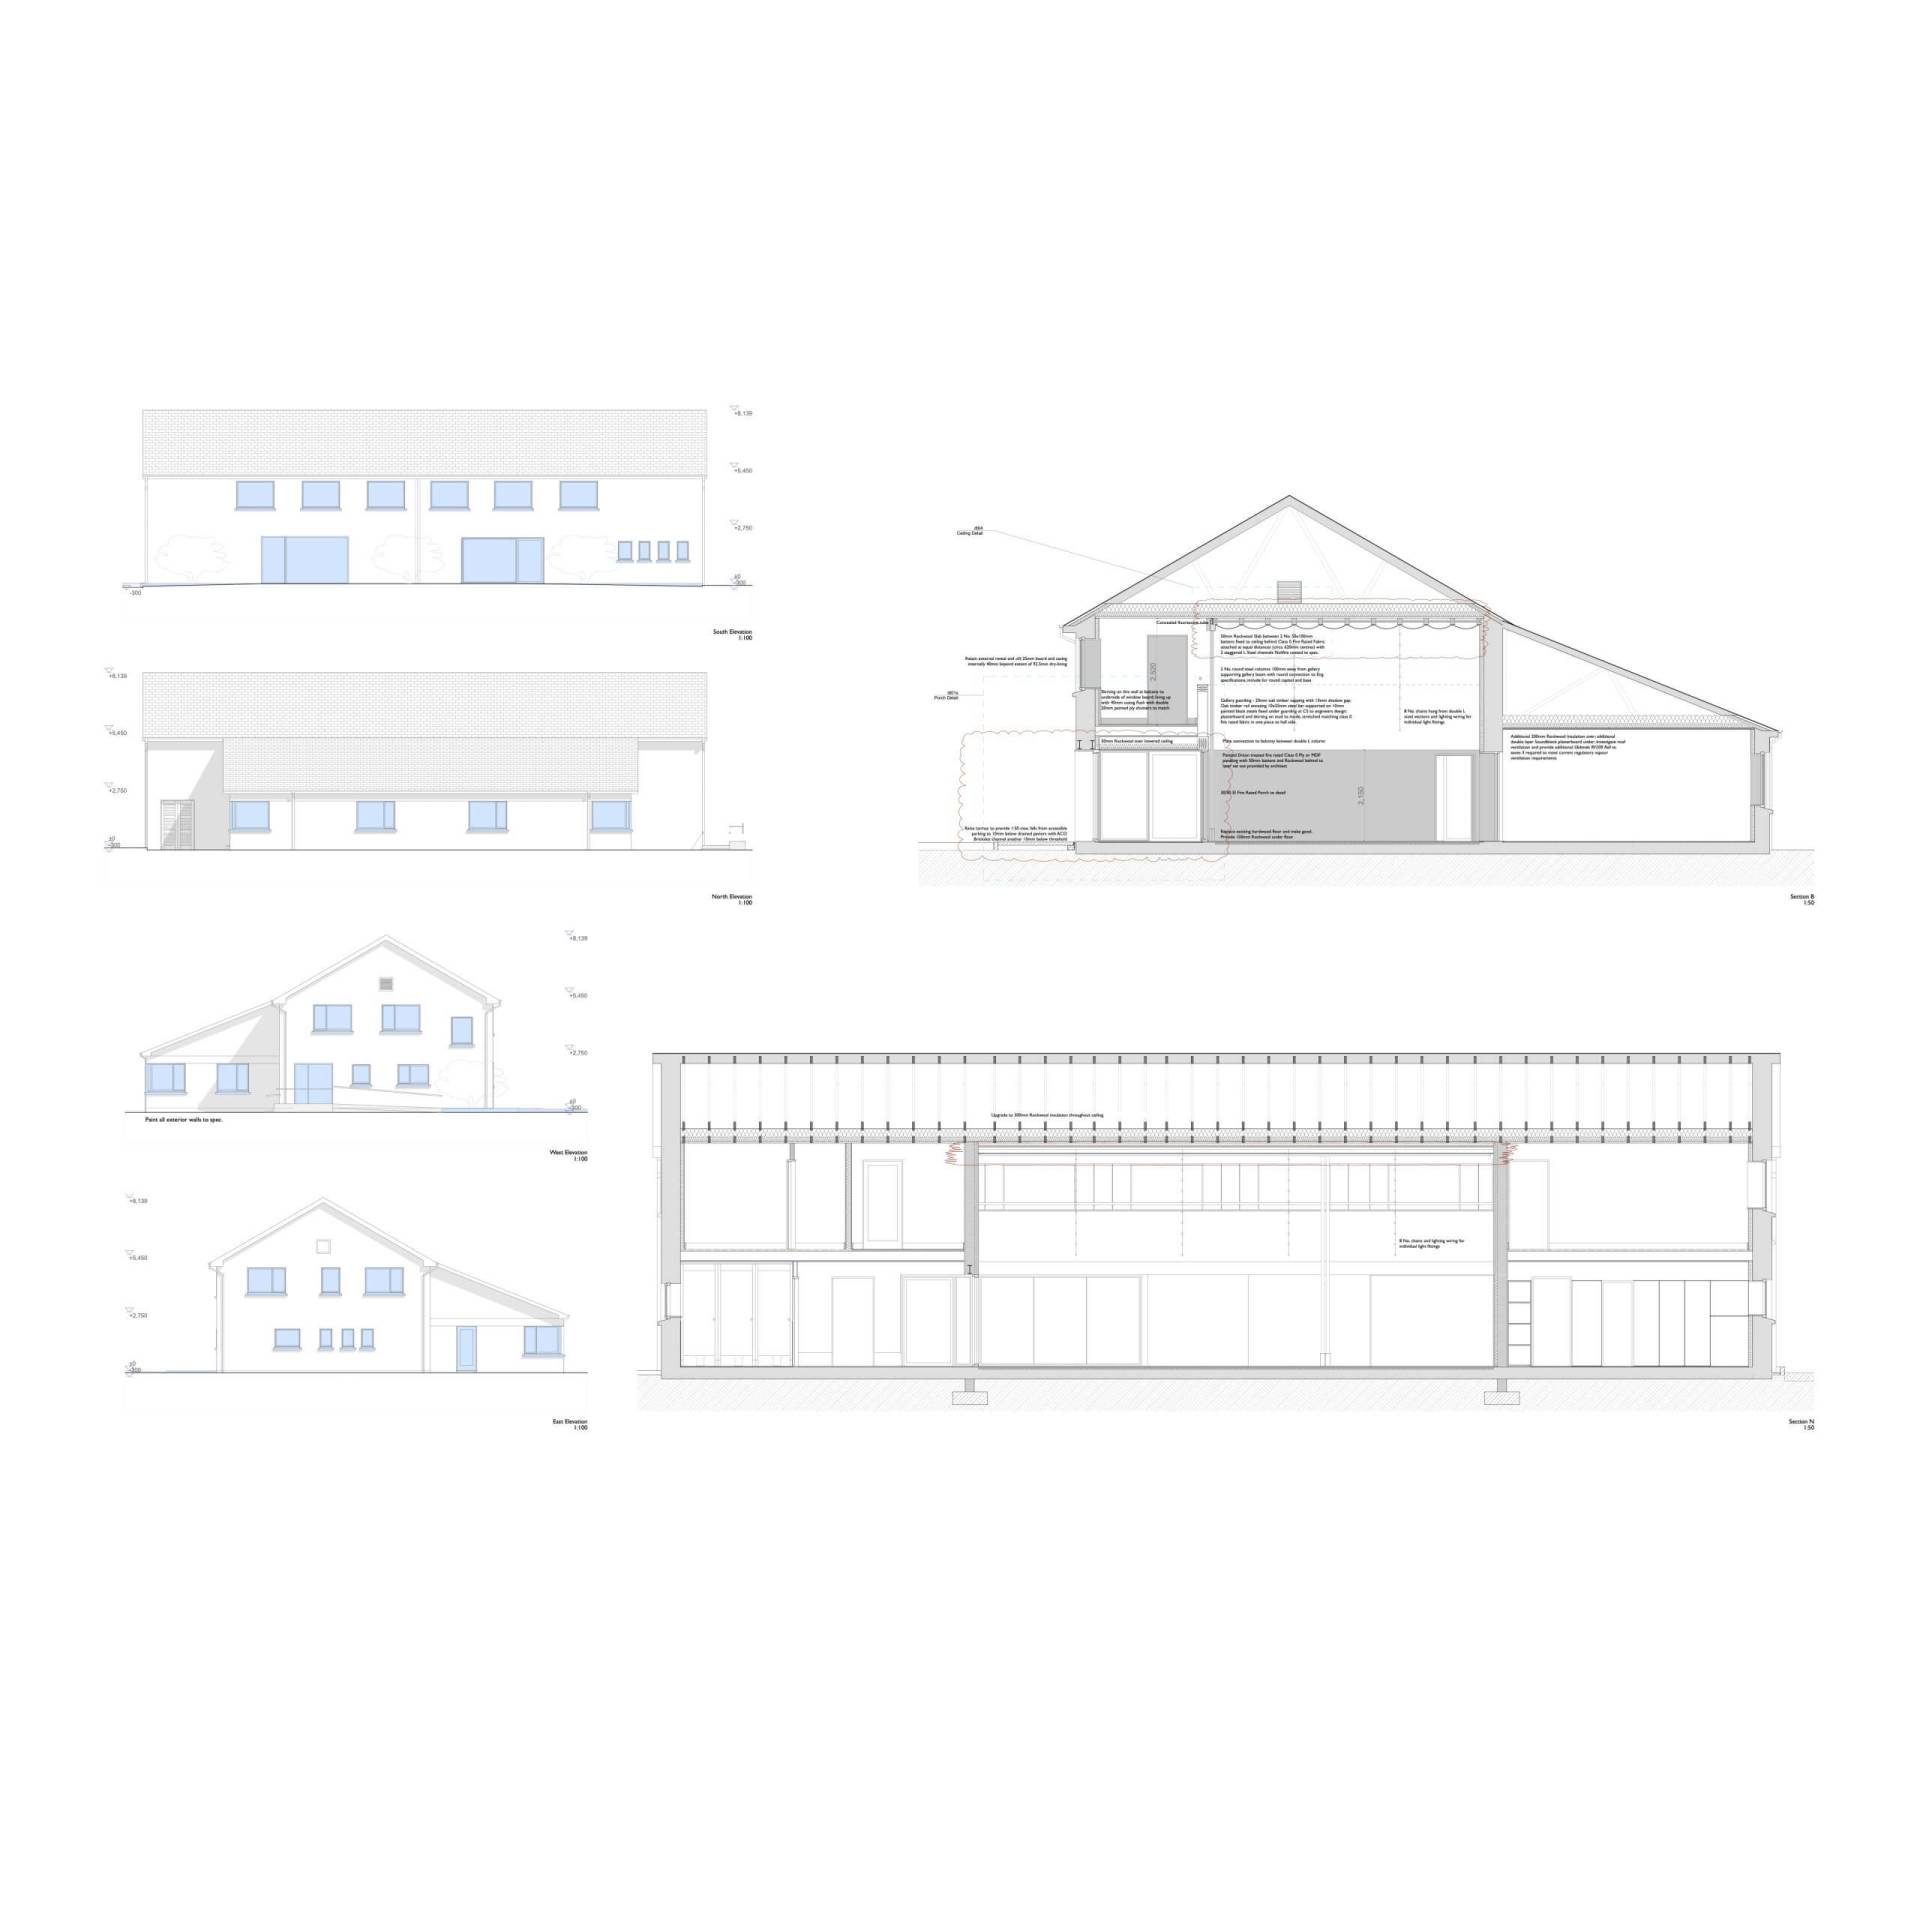 Steve Larkin Architects - Cahir 03 1411 es02 HALL ELEVATIONS & SECTIONS